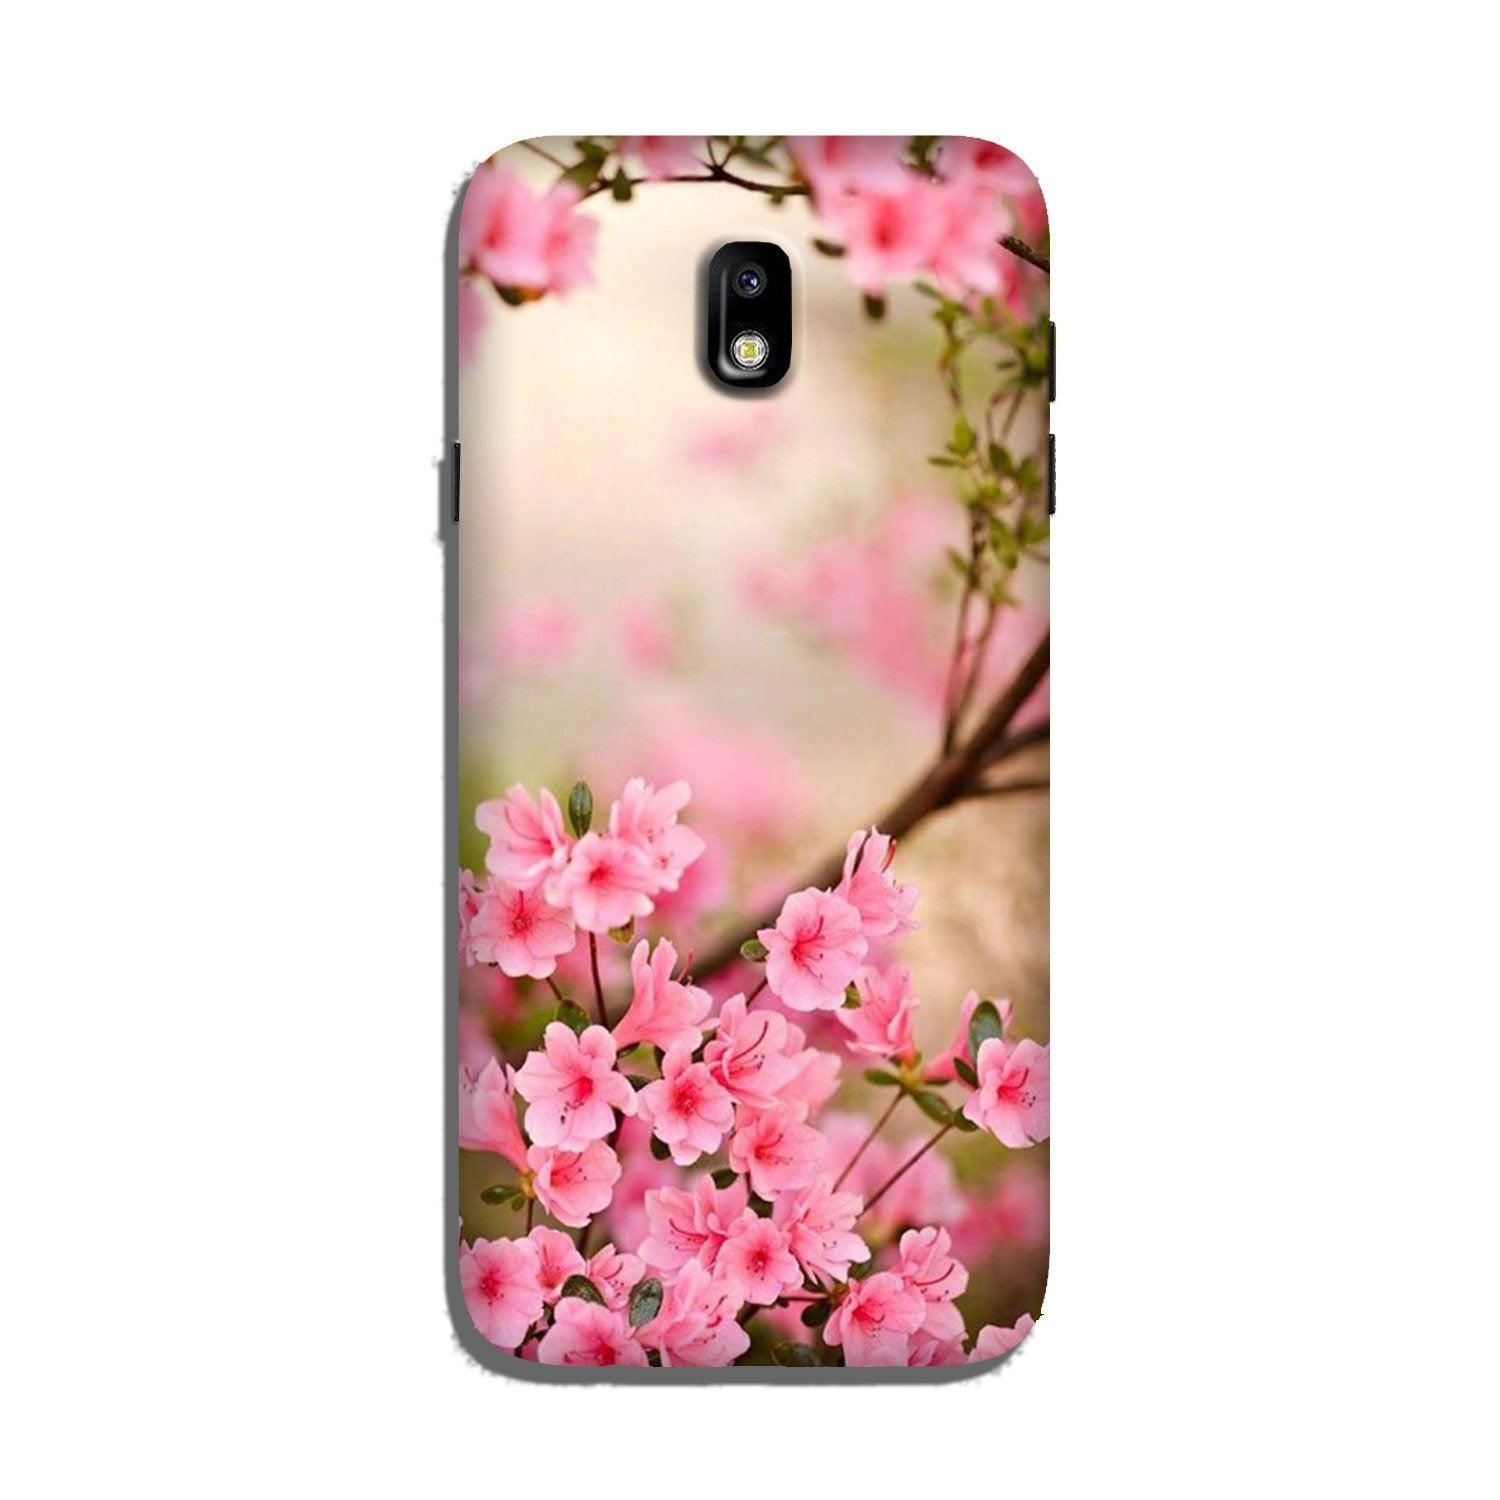 Pink flowers Case for Galaxy J3 Pro